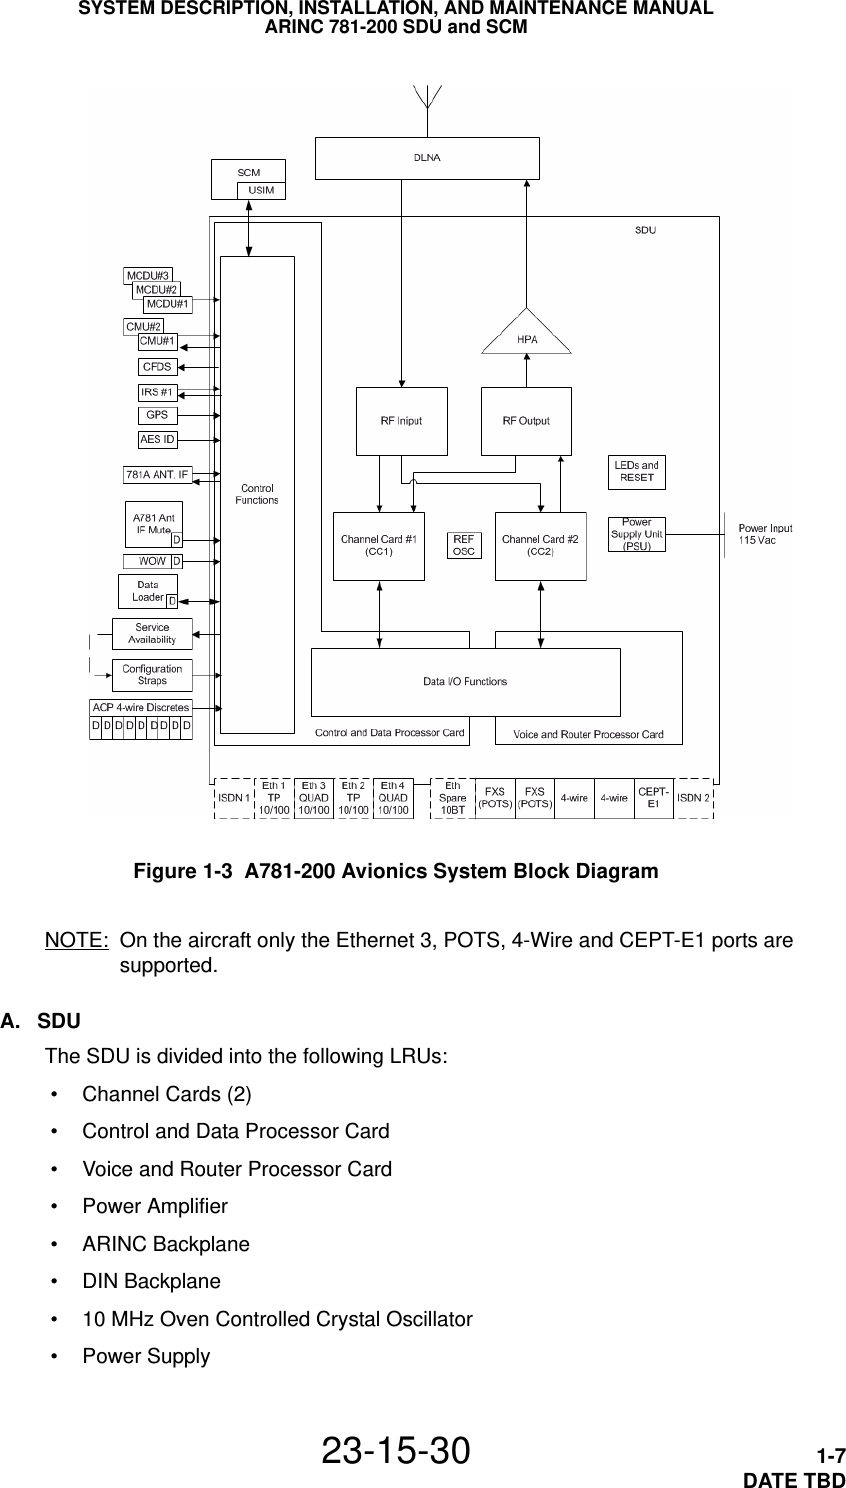 SYSTEM DESCRIPTION, INSTALLATION, AND MAINTENANCE MANUALARINC 781-200 SDU and SCM23-15-30 1-7DATE TBDFigure 1-3  A781-200 Avionics System Block DiagramNOTE: On the aircraft only the Ethernet 3, POTS, 4-Wire and CEPT-E1 ports are supported.A. SDUThe SDU is divided into the following LRUs: • Channel Cards (2) • Control and Data Processor Card • Voice and Router Processor Card • Power Amplifier • ARINC Backplane • DIN Backplane • 10 MHz Oven Controlled Crystal Oscillator • Power Supply